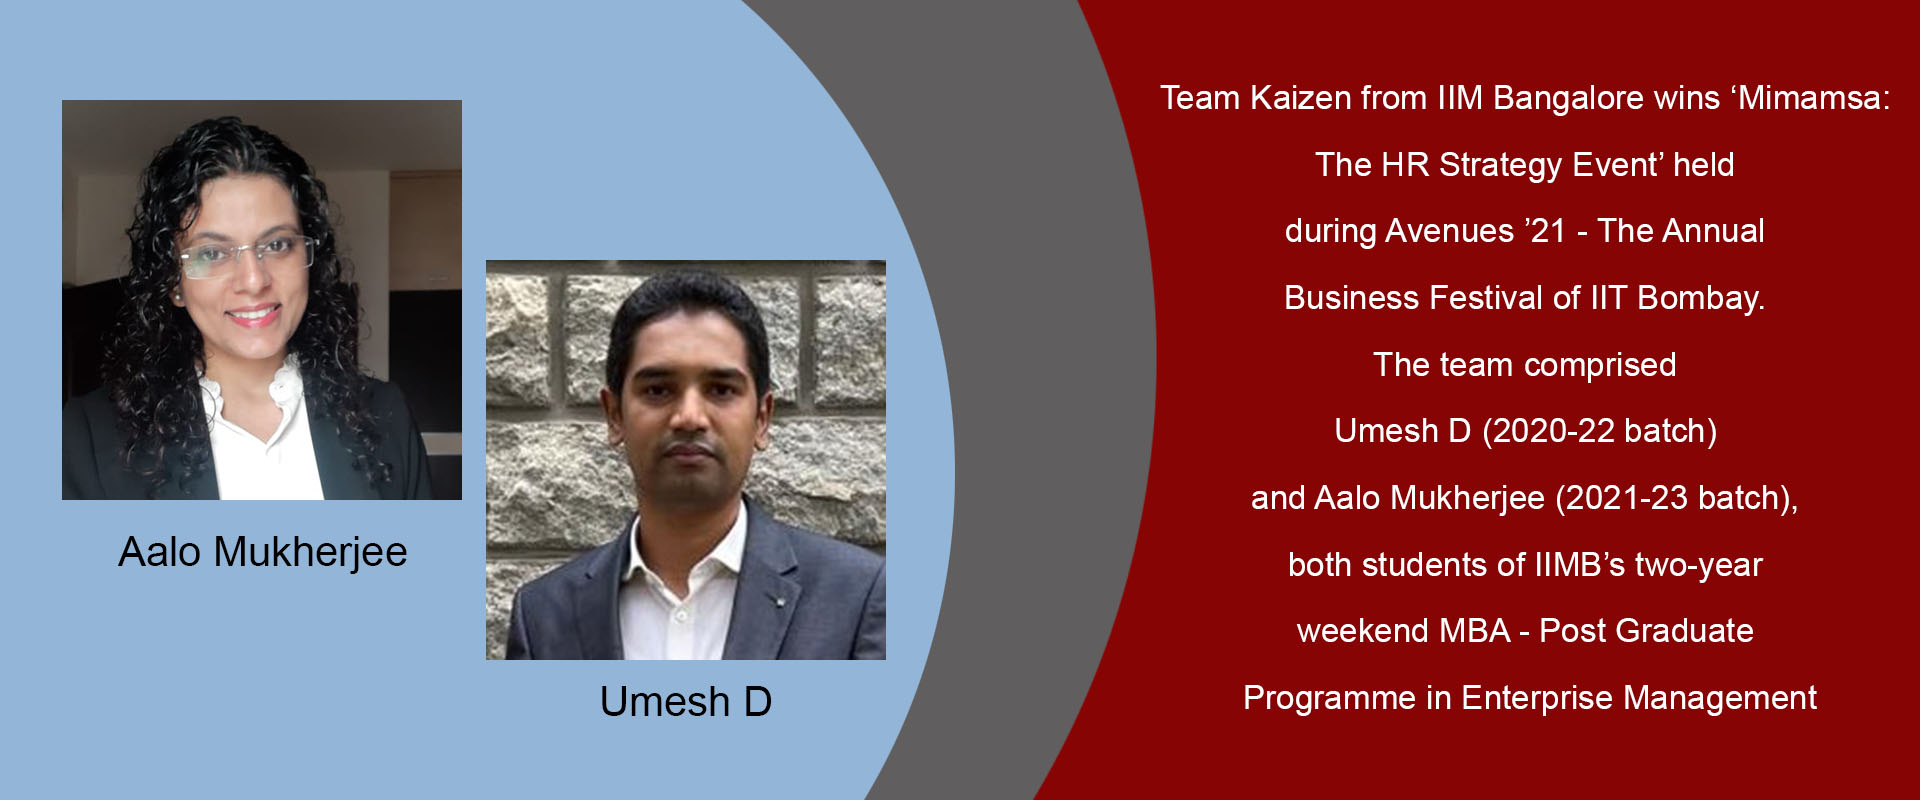 Team Kaizen from IIM Bangalore wins ‘Mimamsa: The HR Strategy Event’ held during Avenues ’21 - The Annual Business Festival of IIT Bombay